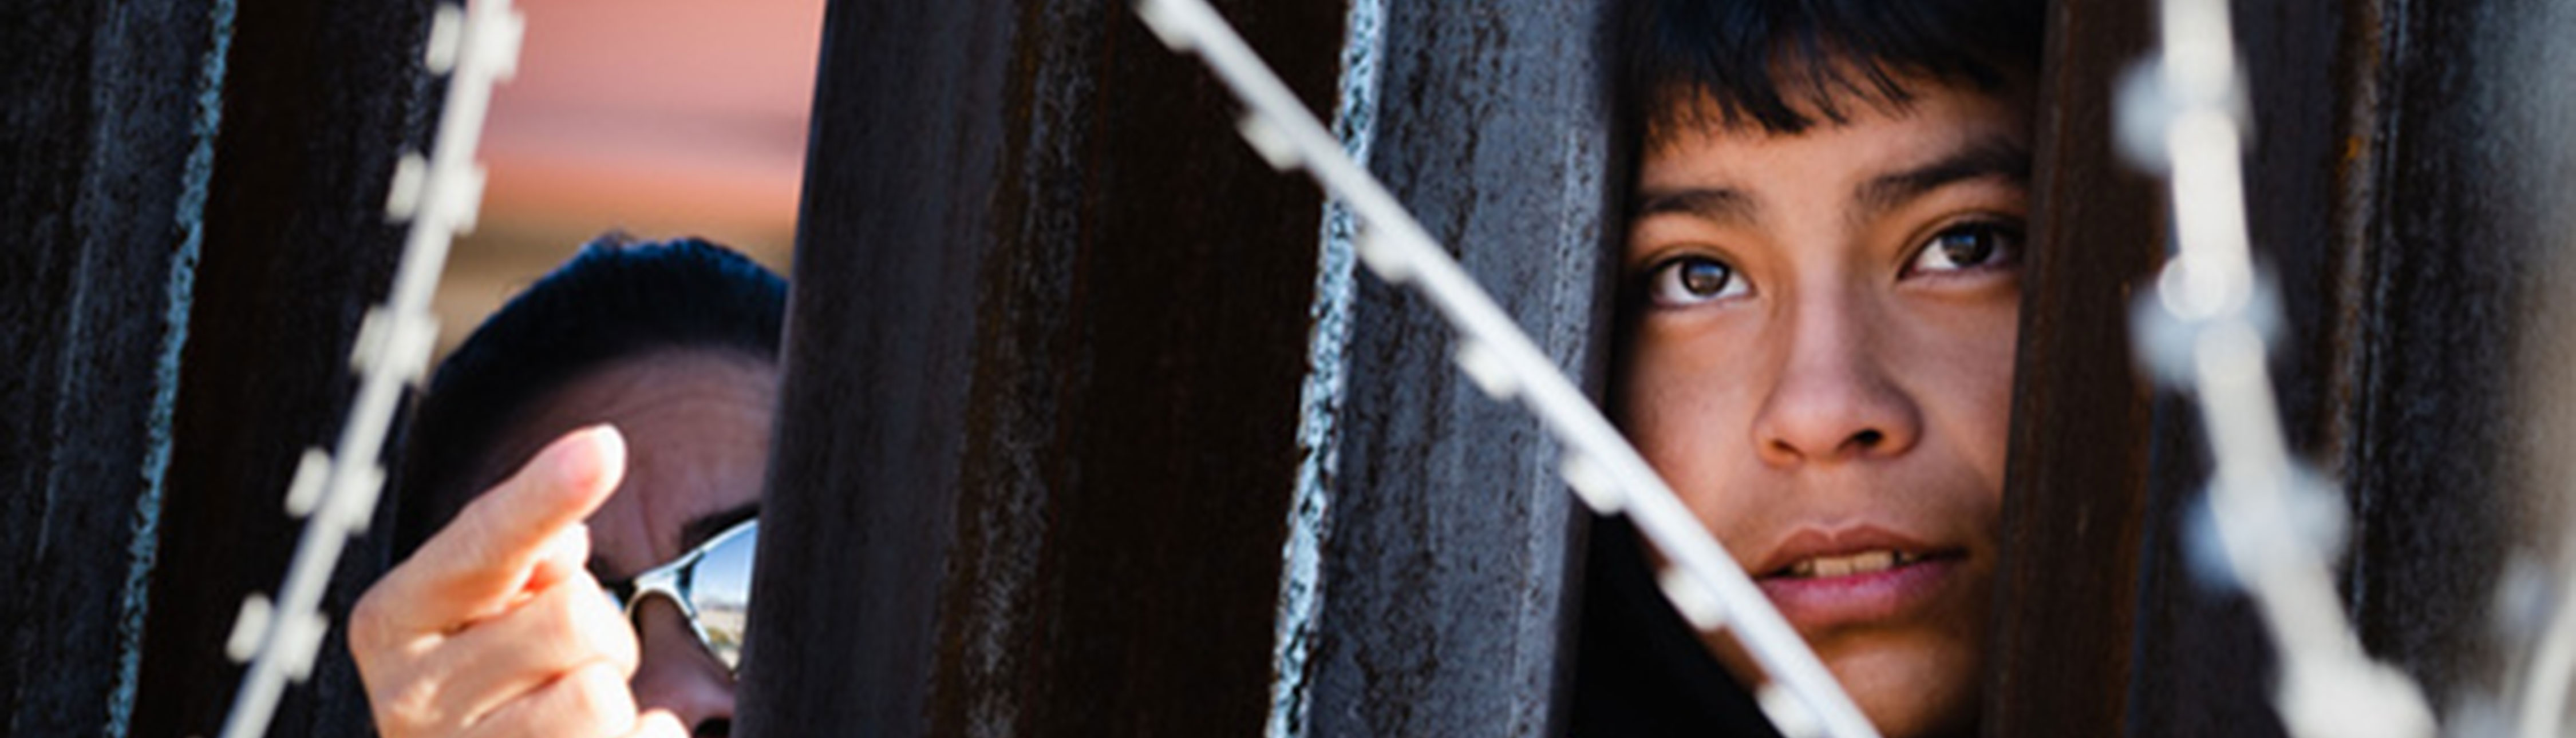 Photo of a boy's face looking between two iron bars of the southern border fence, with barbed wire in the foreground and another person's hand to his right pointing through the fence.